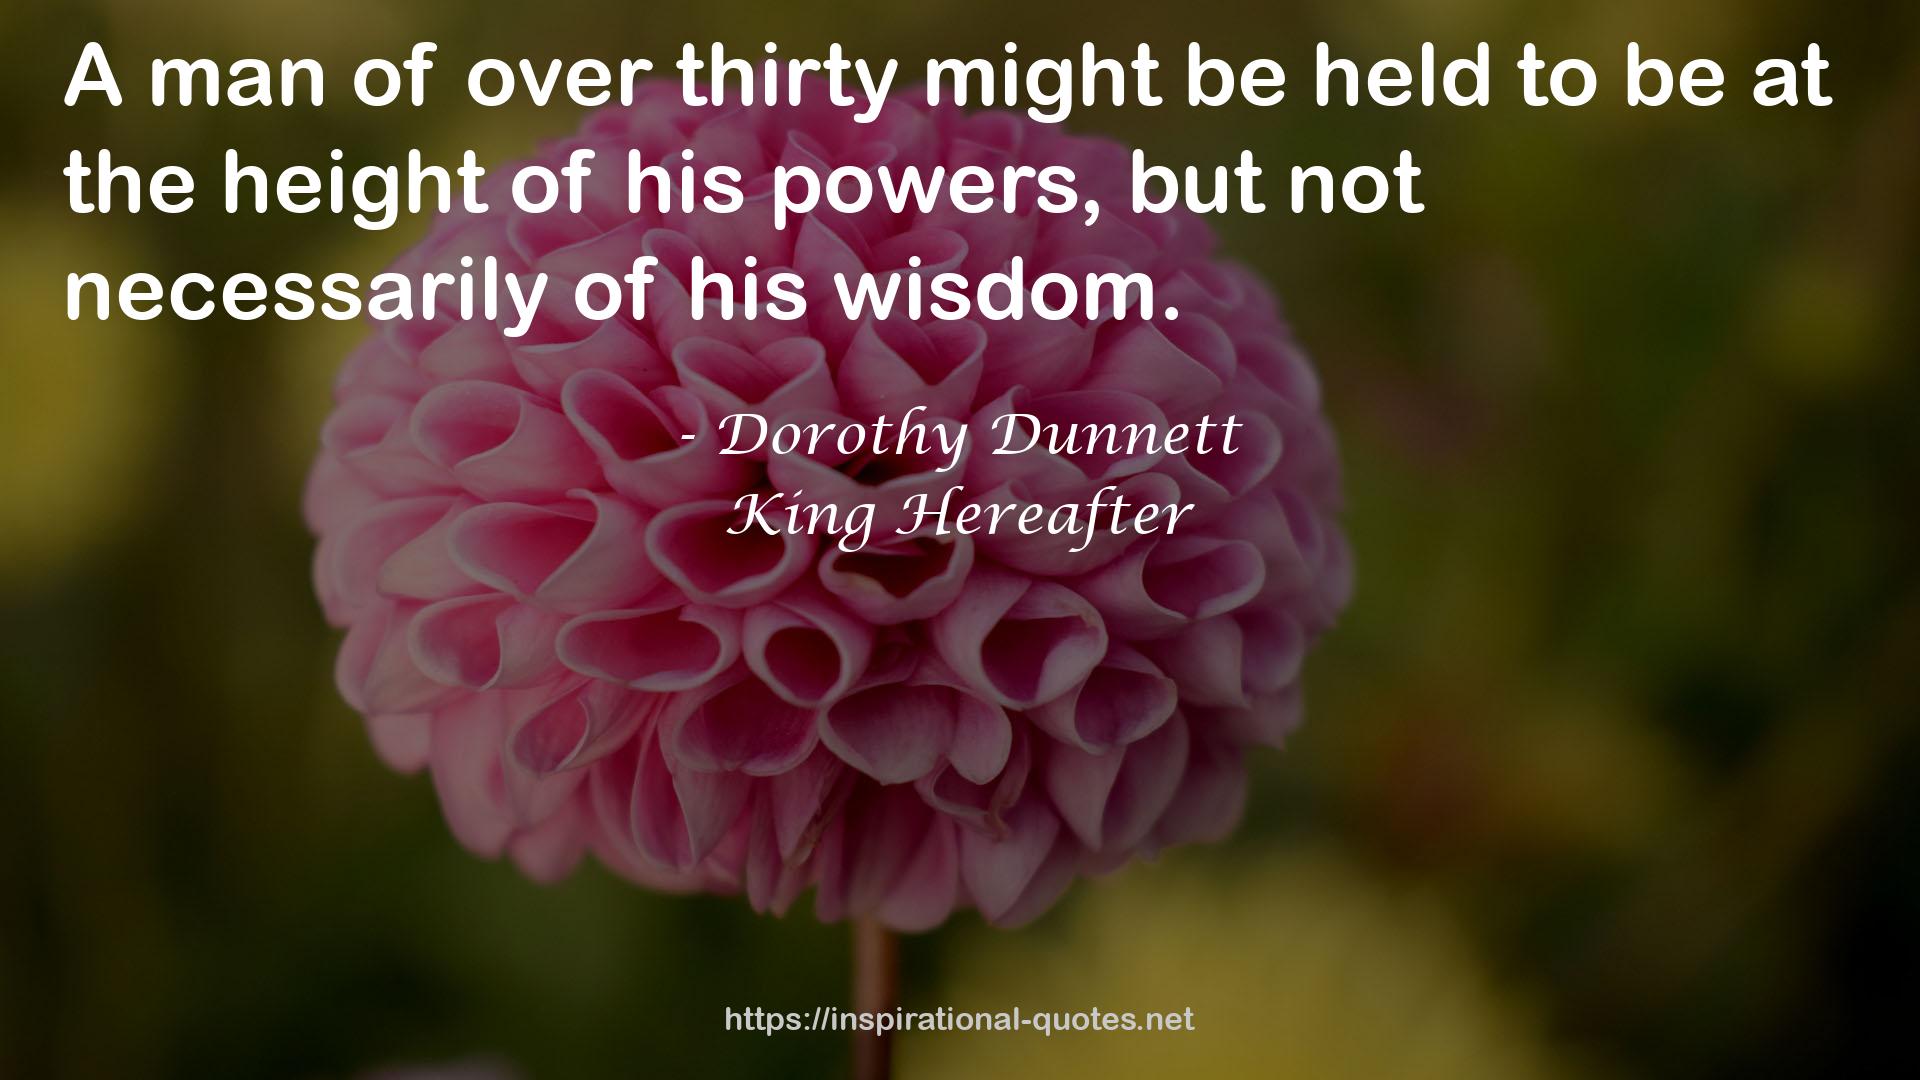 King Hereafter QUOTES